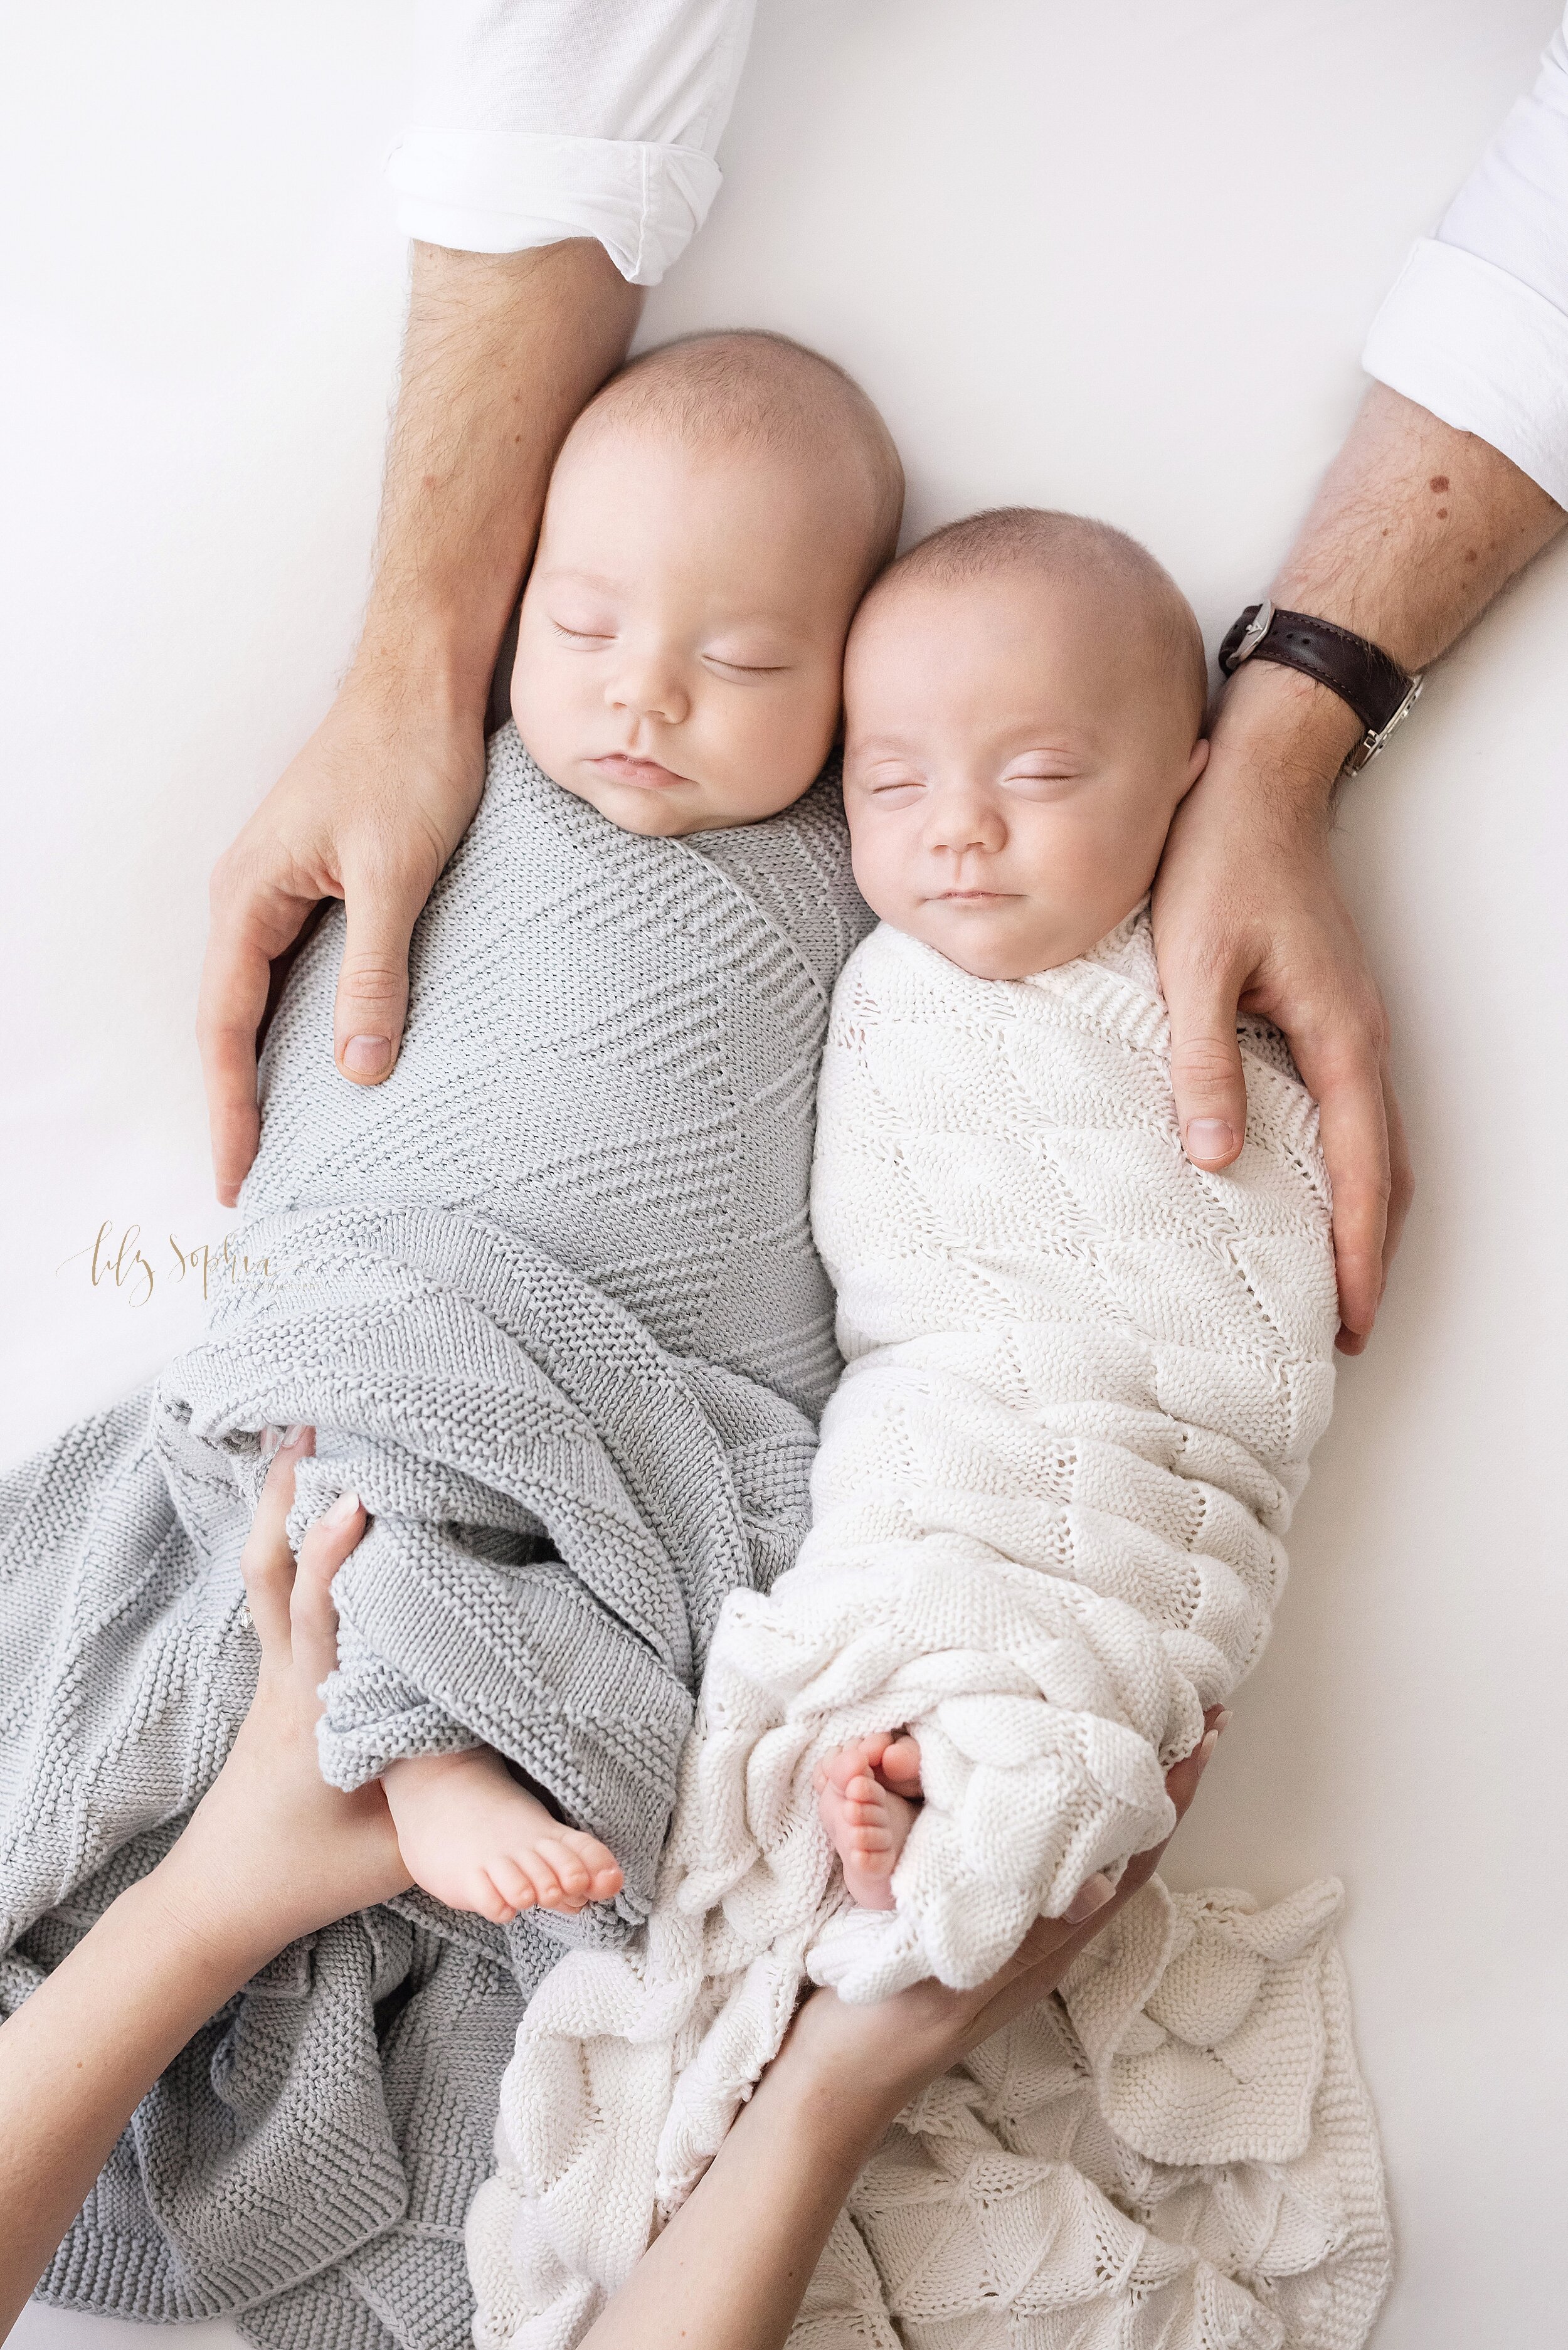  Newborn photo session of twin boys peacefully sleeping next to one another swaddled in knit blankets to their chins with dad placing his hands on the shoulders of the infants and mom placing her hands on their sons’ feet taken in a studio in Ponce C